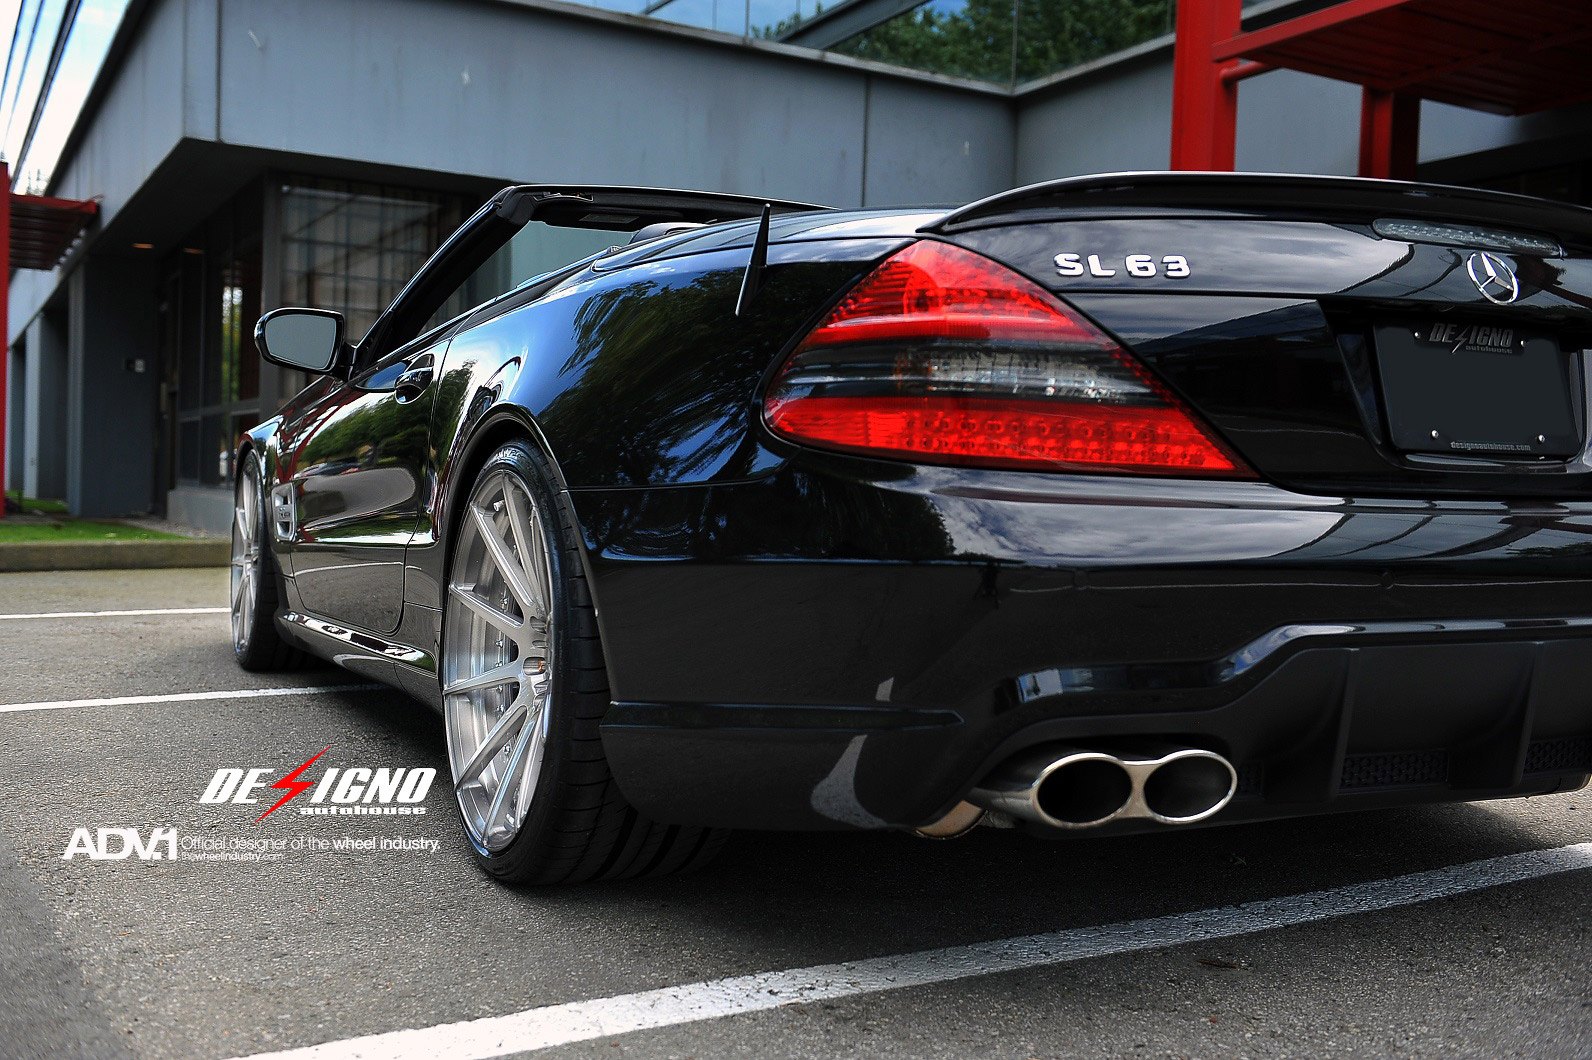 Black Convertible Mercedes SL Class with Red LED Taillights - Photo by ADV.1